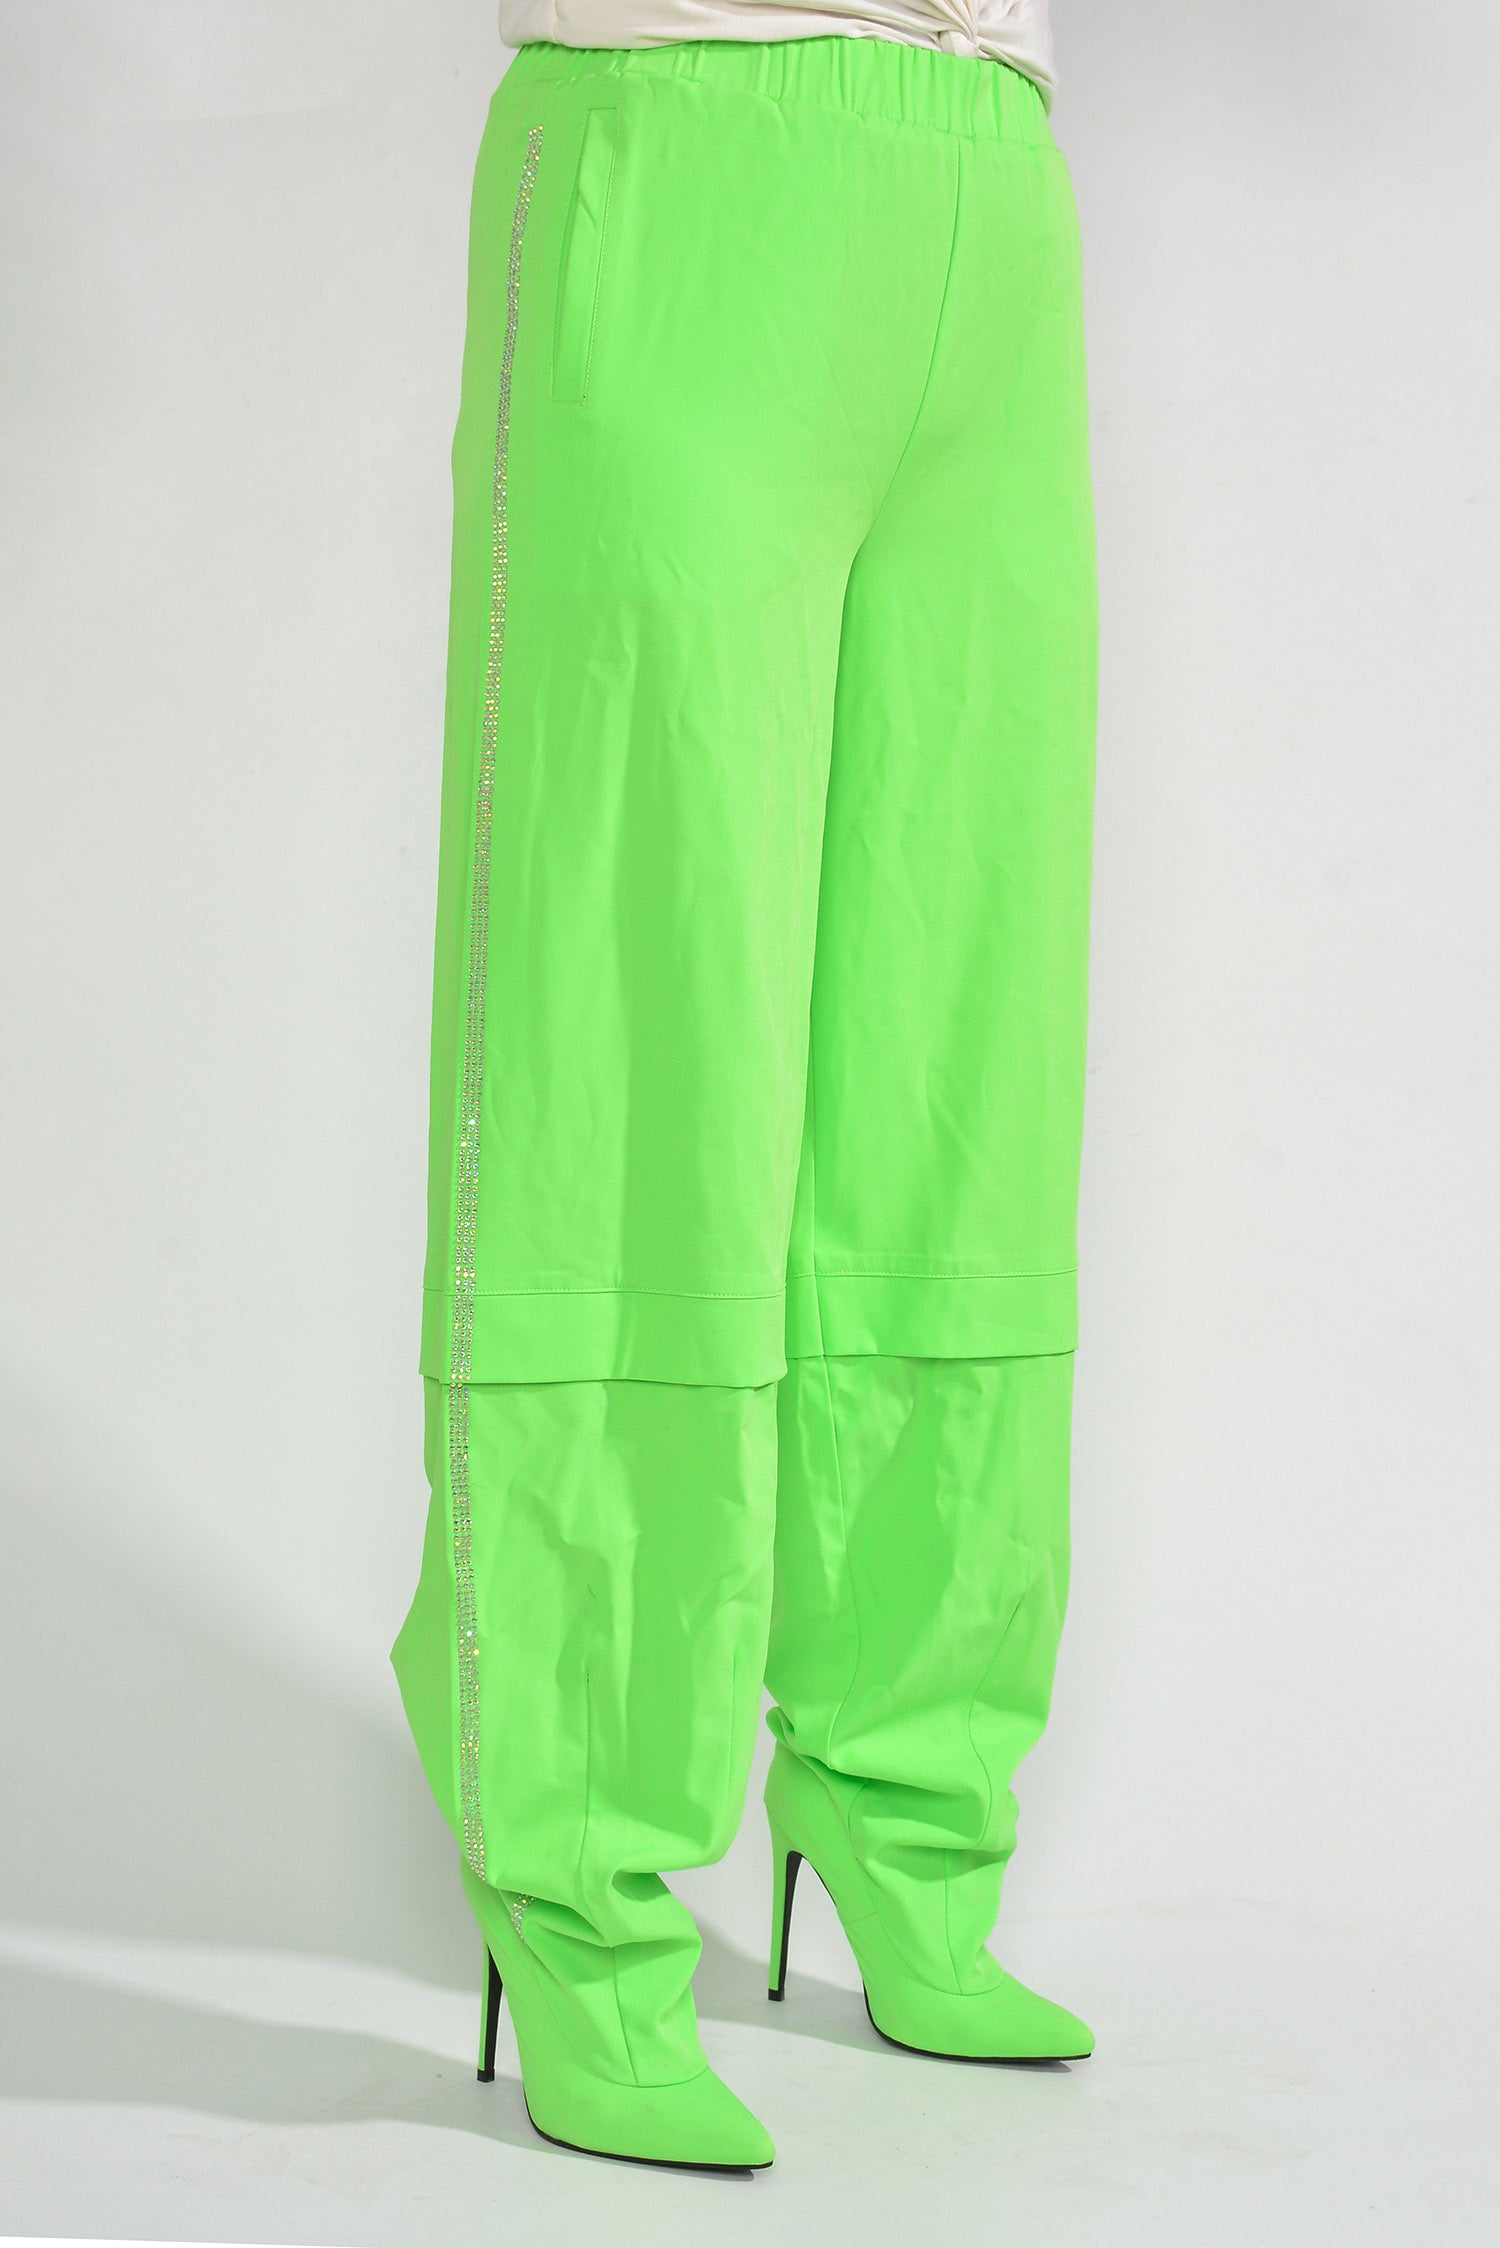 Cape Robbin - BAGGY - LIME - BOOTS